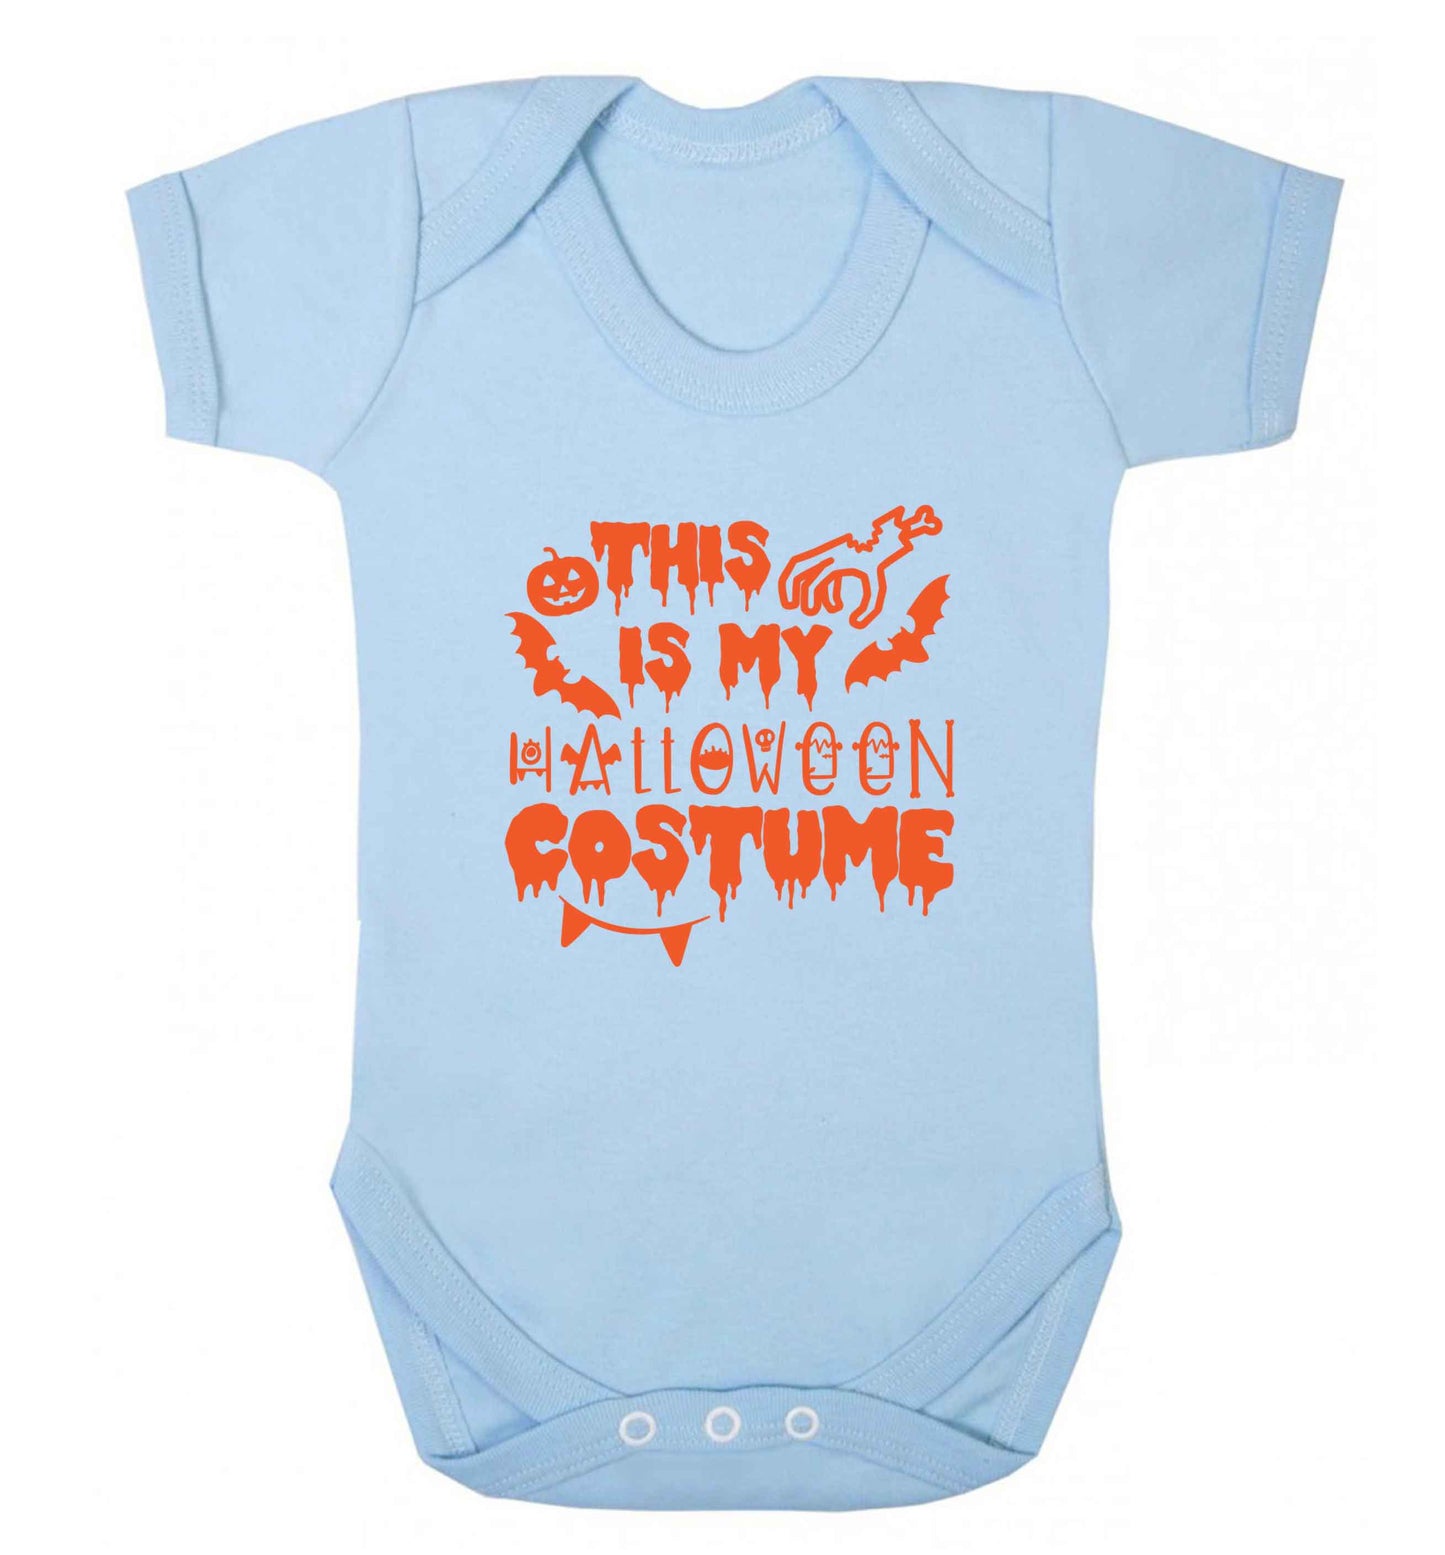 This is my halloween costume baby vest pale blue 18-24 months